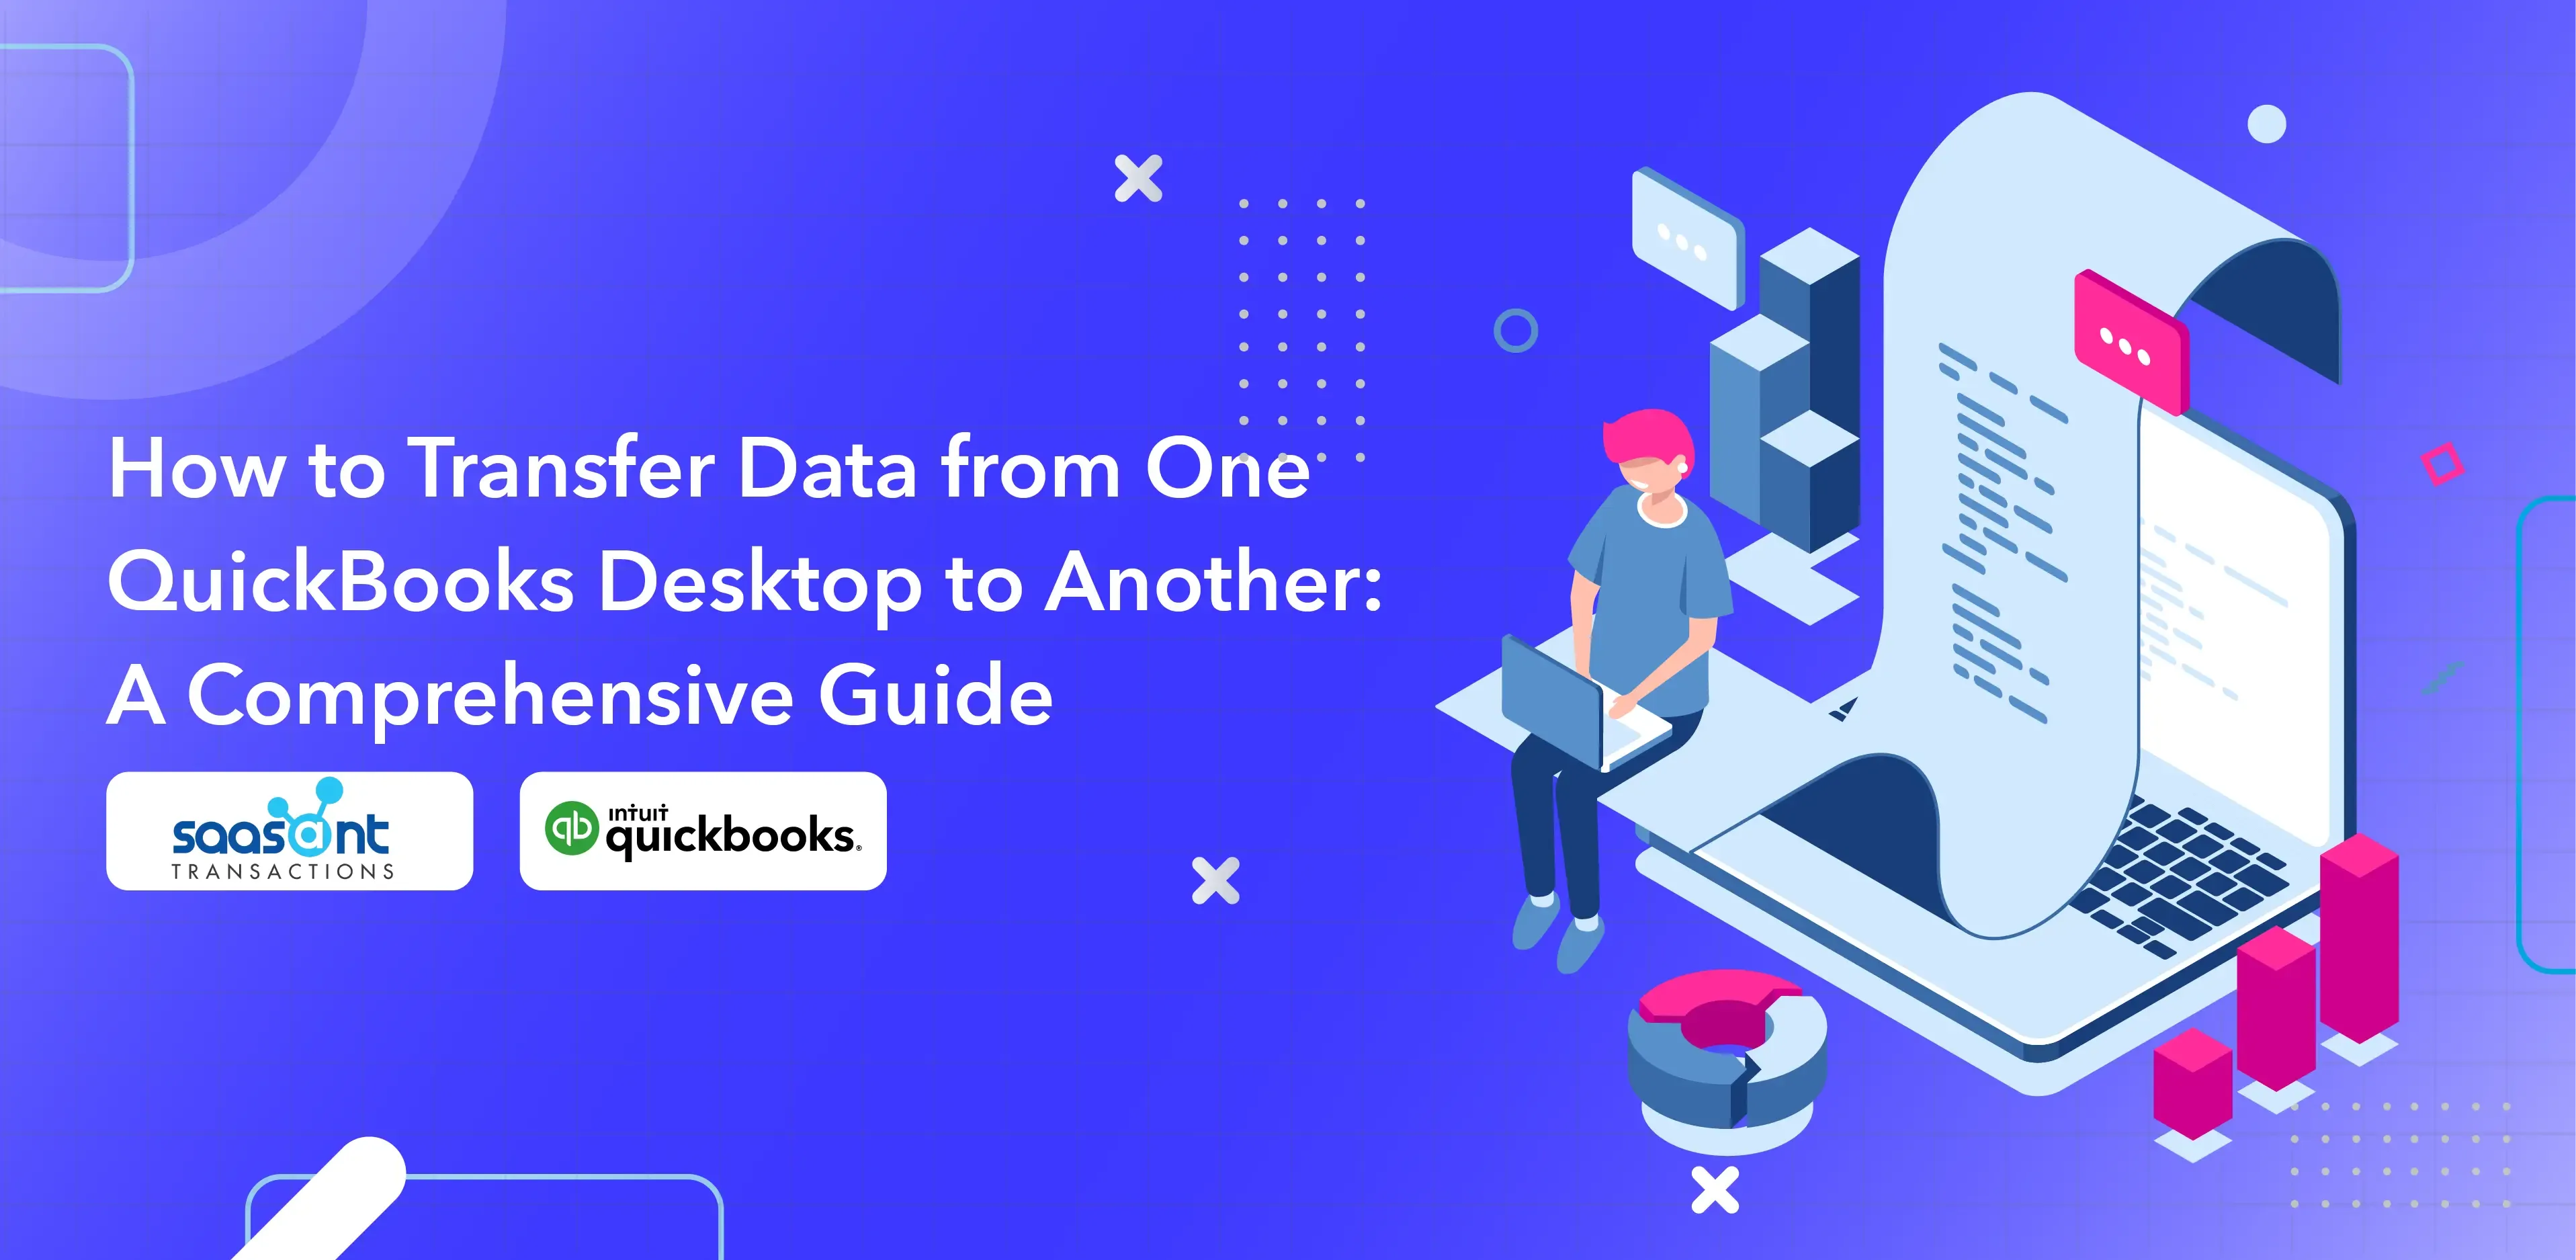 How-to-Transfer-Data-from-One-QuickBooks-Desktop-to-Another-A-Comprehensive-Guide-01.webp